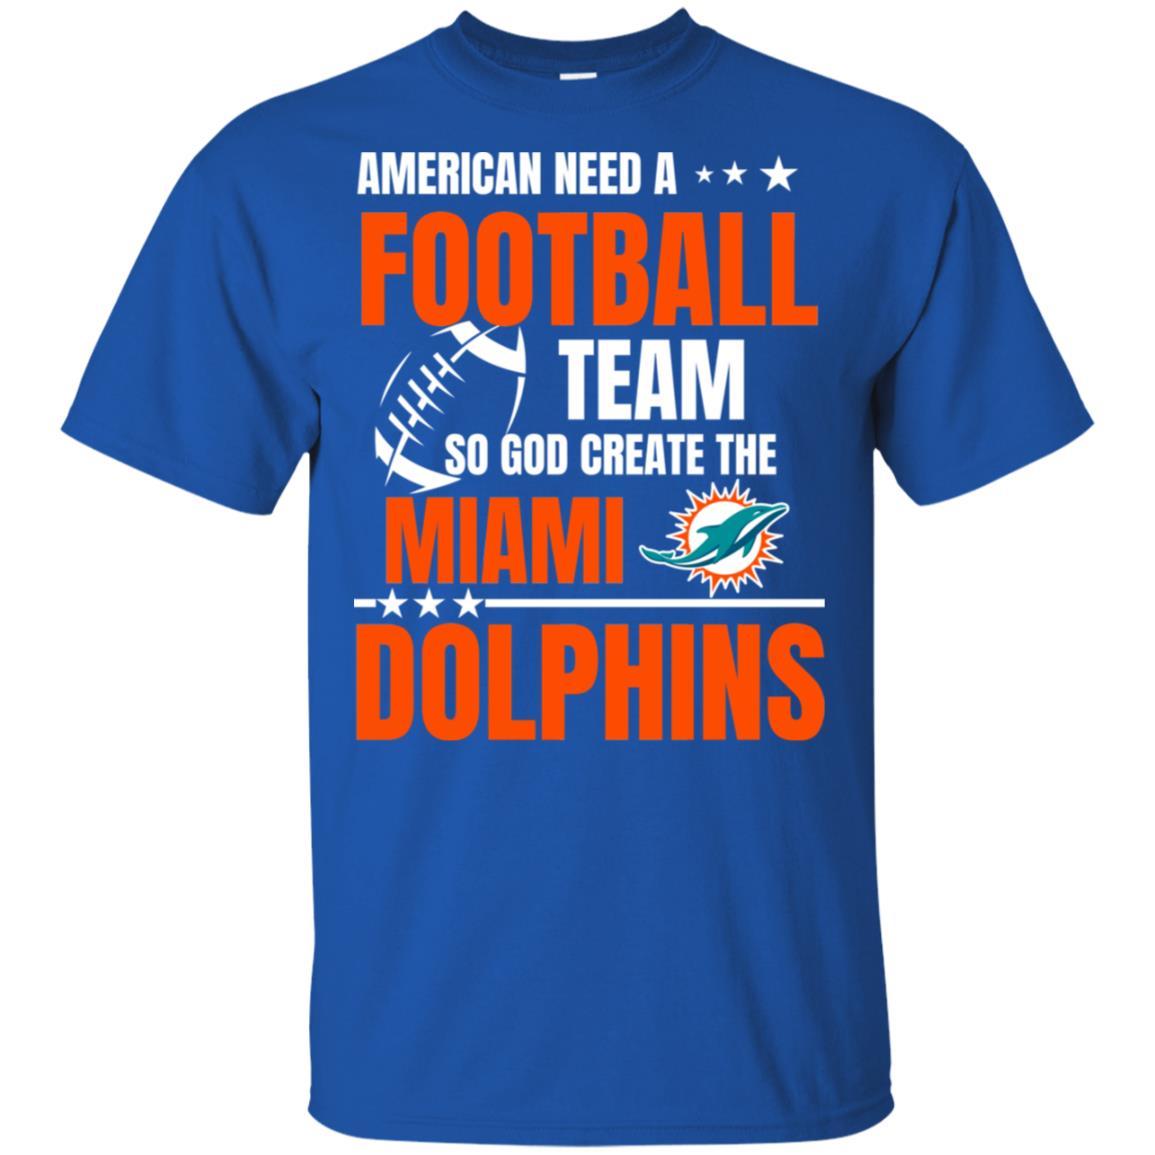 Miami Dolphins Shop - American Need A Miami Dolphins Team T Shirt 1